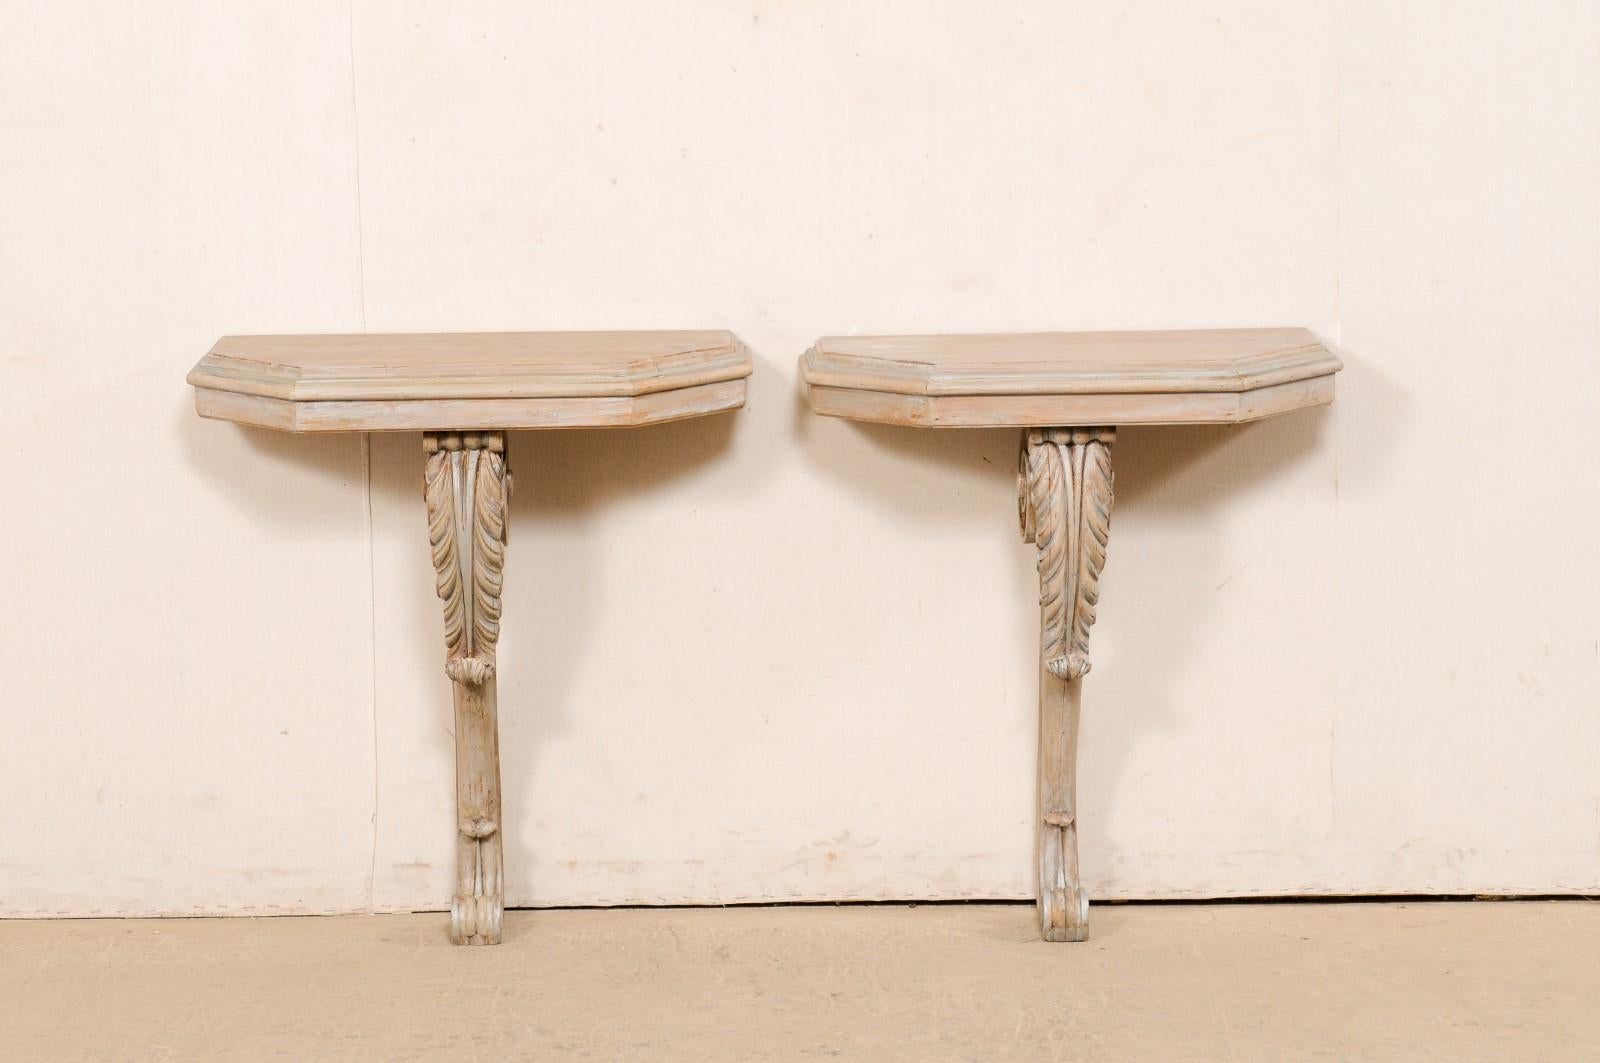 An American pair of carved-wood and painted wall mounted consoles from the mid 20th century. This vintage pair of console tables have been designed in French style, with demi-polygon shaped top, which is supported with a single leg/brace of carved